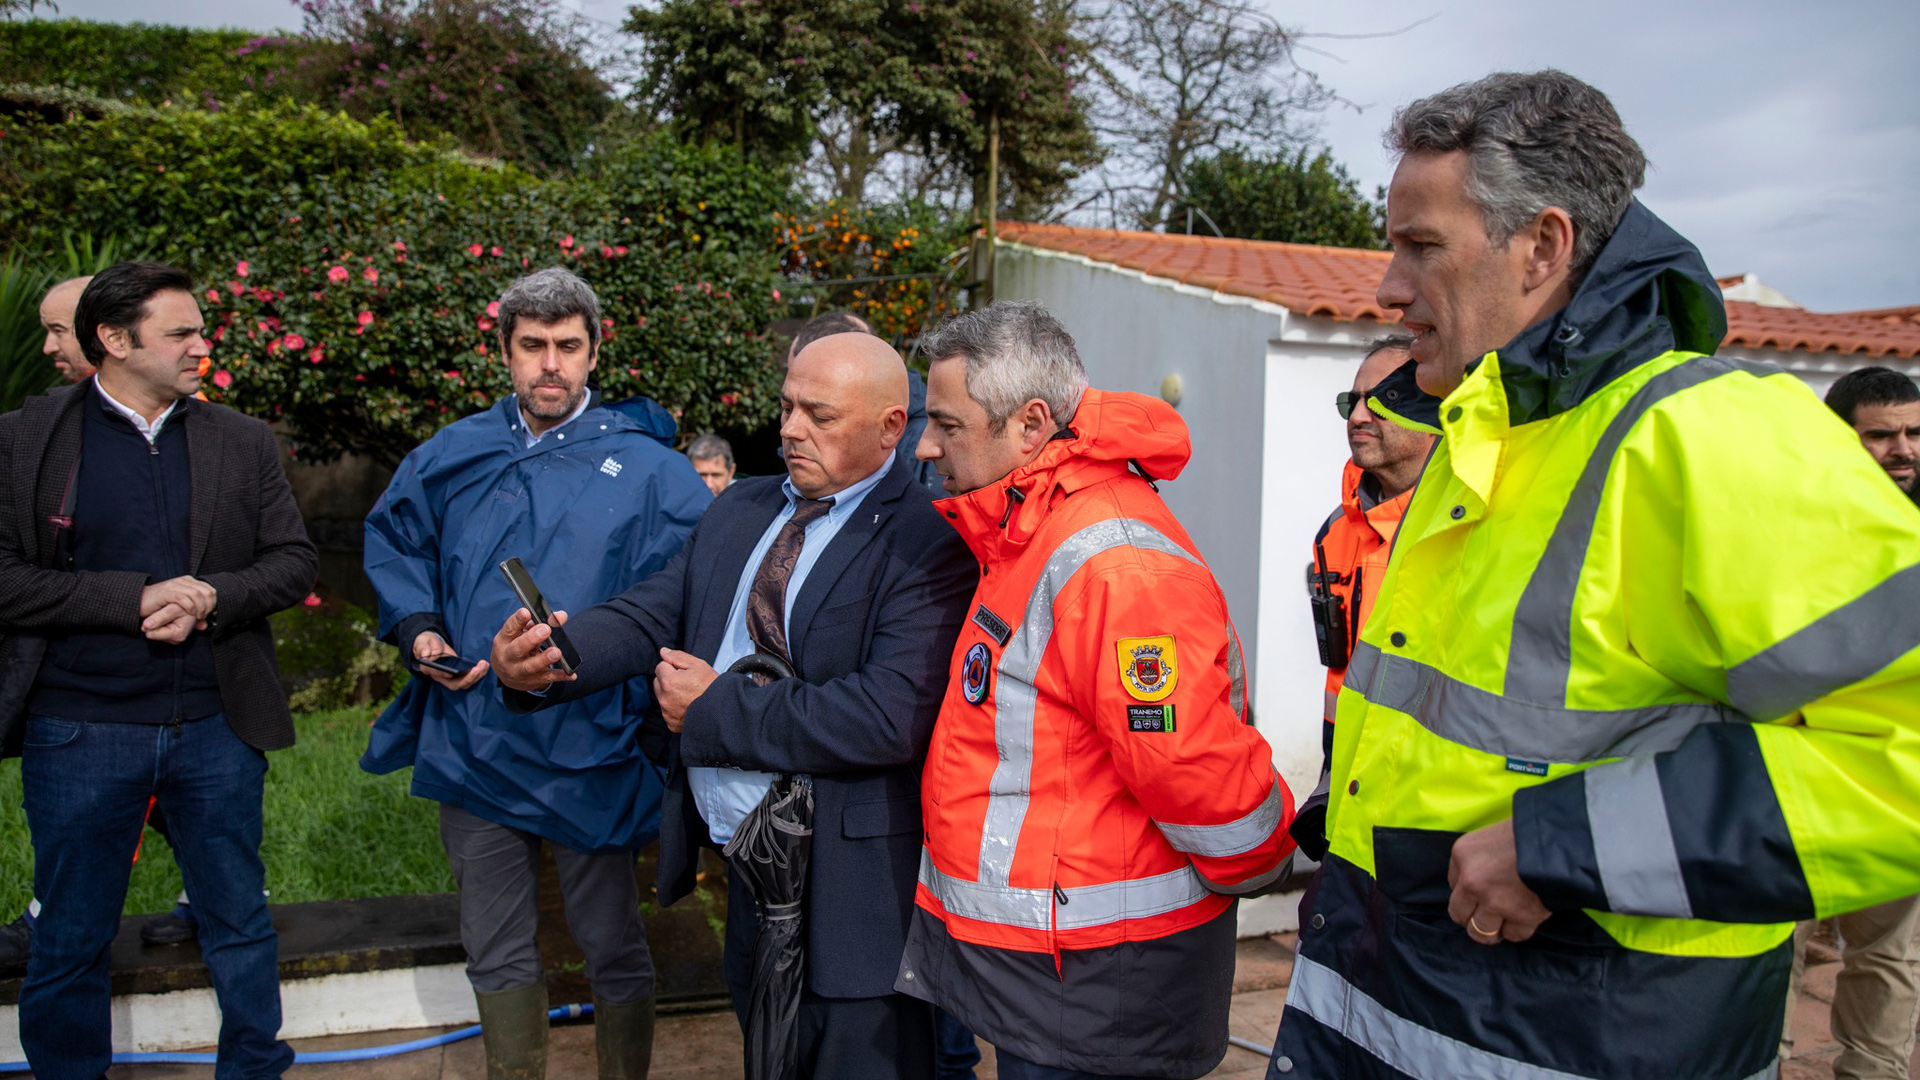 Government of the Azores monitors the situation in parishes of Ponta Delgada affected by bad weather